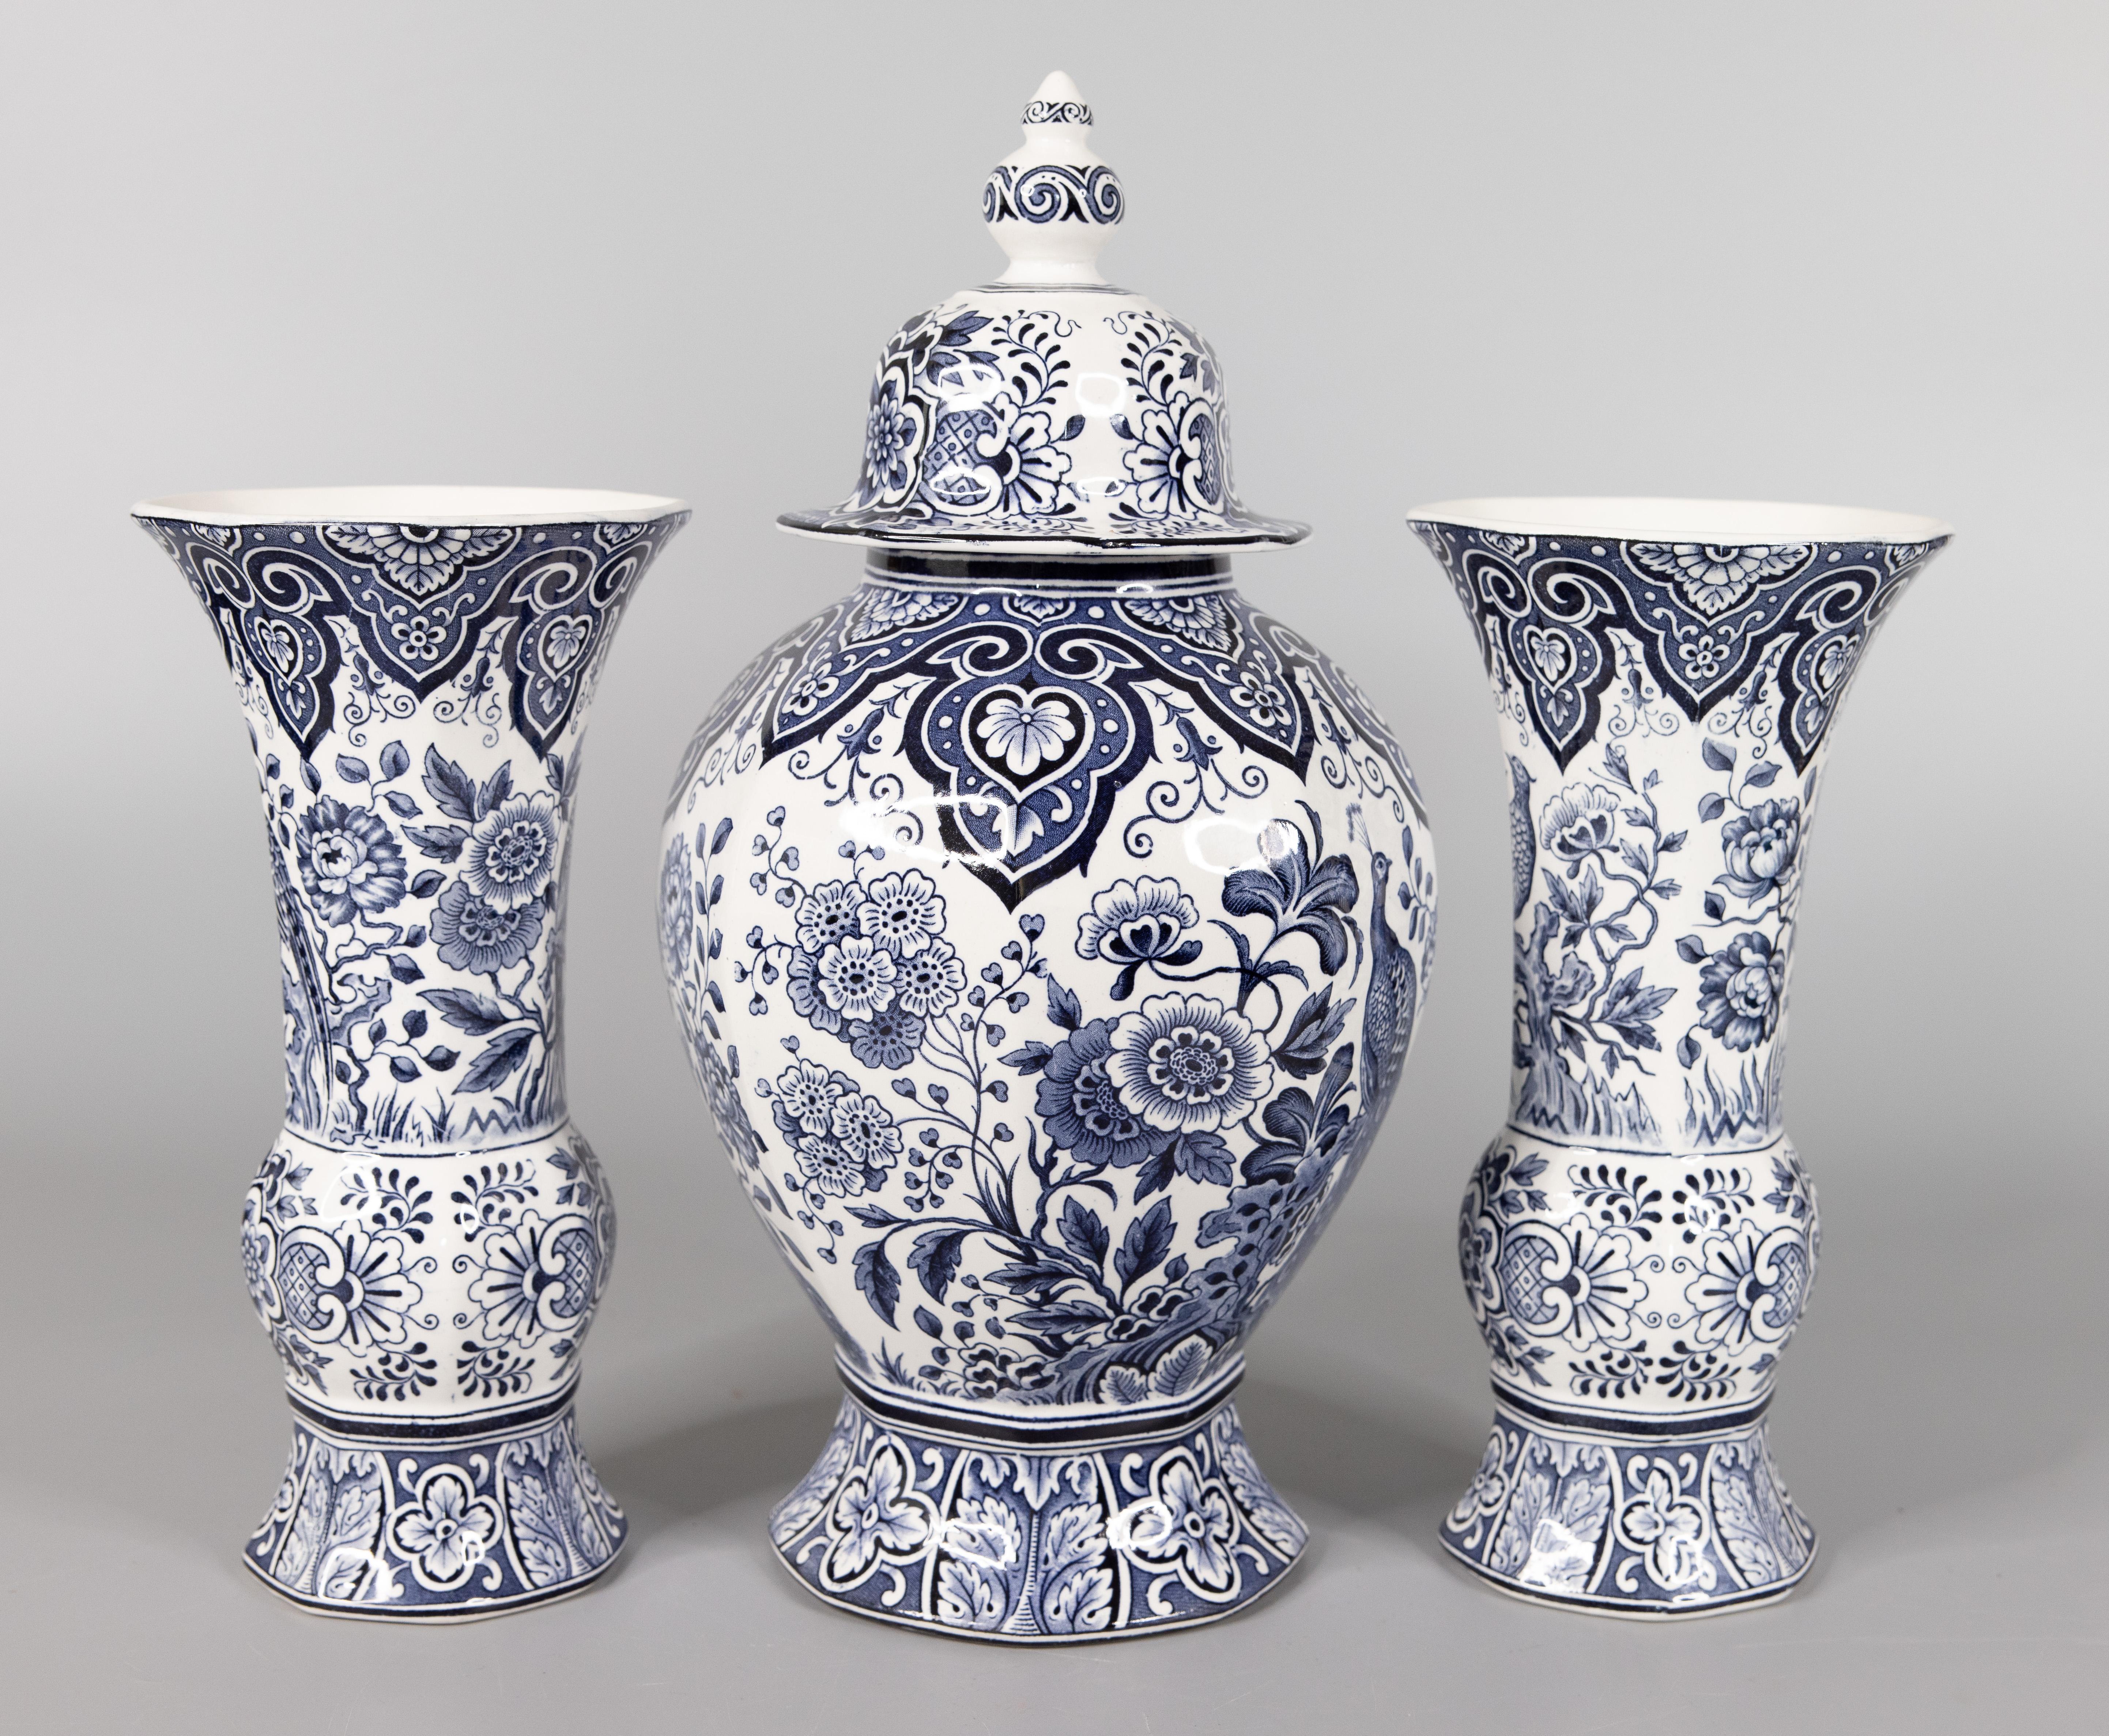 A gorgeous set of three antique Delft garniture vases by Maestricht, made in Holland, circa 1920. Maker's mark on reverse. This fine garniture set has two lovely trumpet vases and one lidded center vase or ginger jar with a peacock and floral